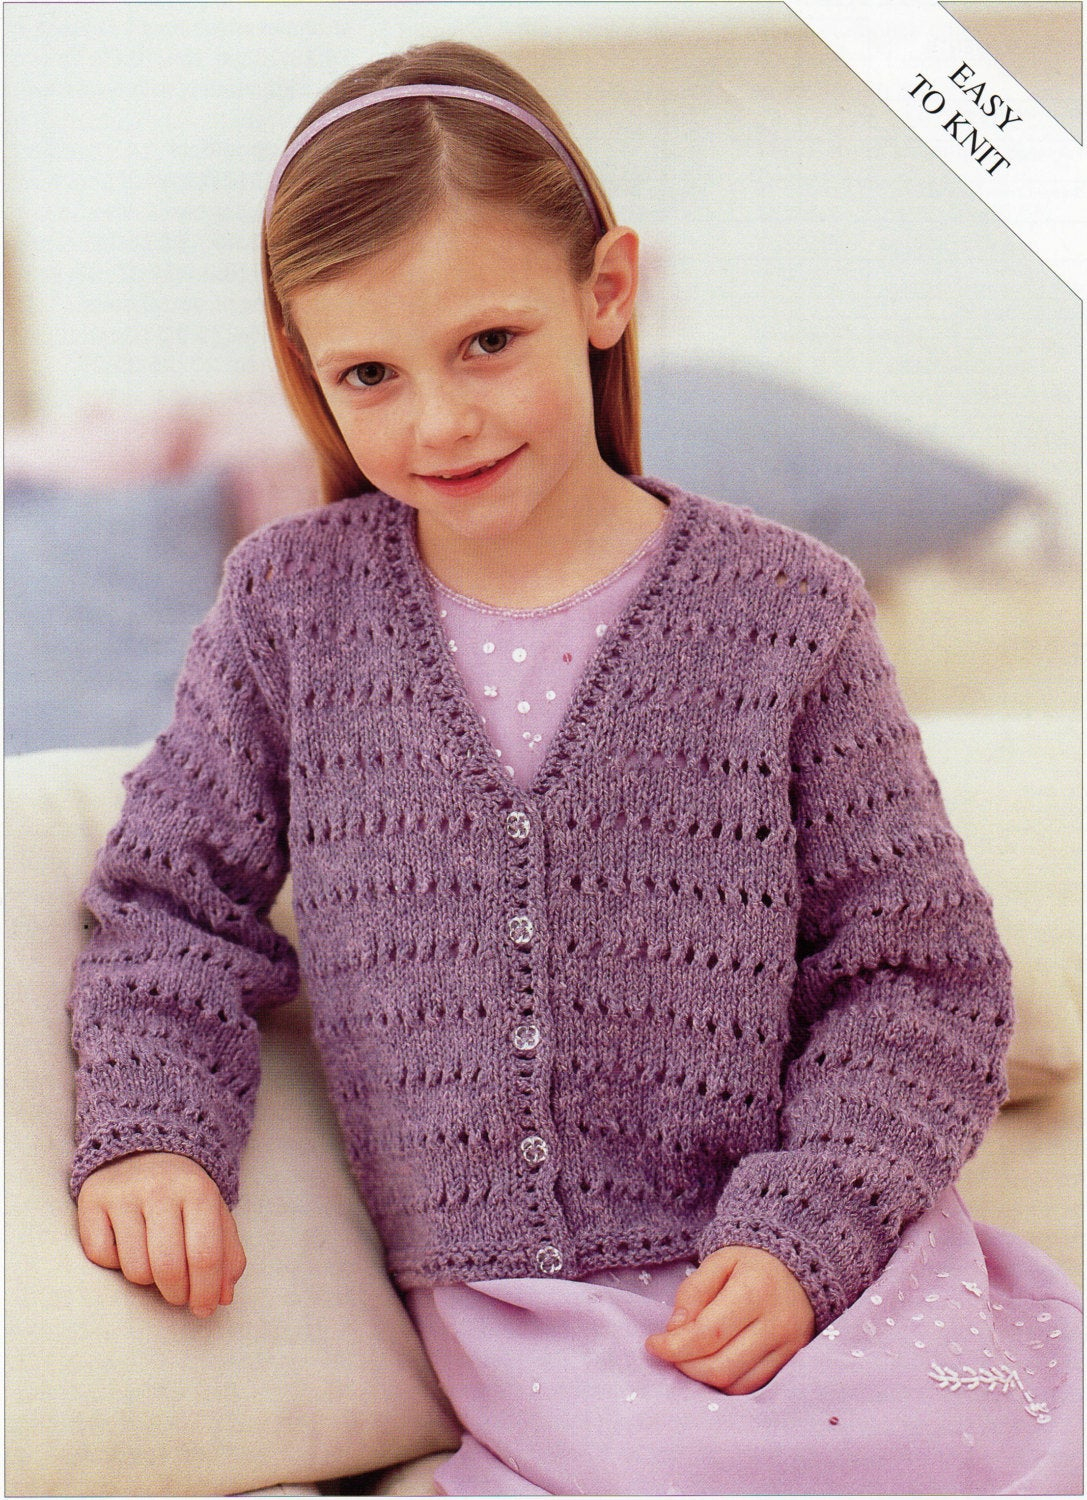 Knitting Patterns For Childrens Sweaters Free Free Knitting Patterns For Girls Cardigans Londonmetalumniml Visit